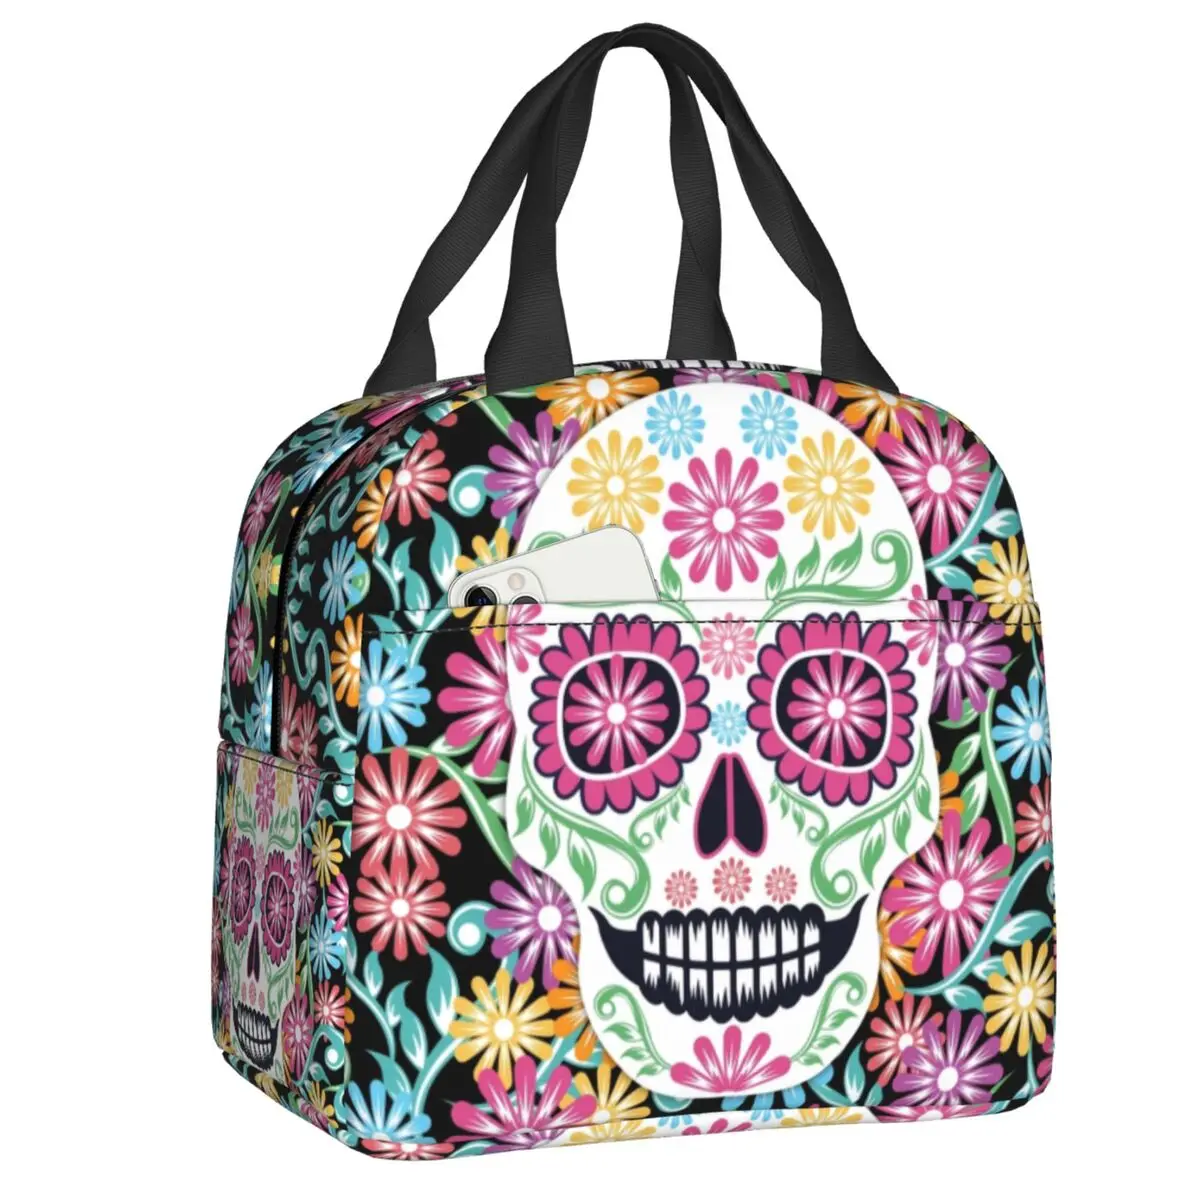 

Day Of The Dead Sugar Skull Insulated Lunch Bag Leakproof Halloween Mexican Flower Thermal Cooler Bento Box Office Picnic Travel